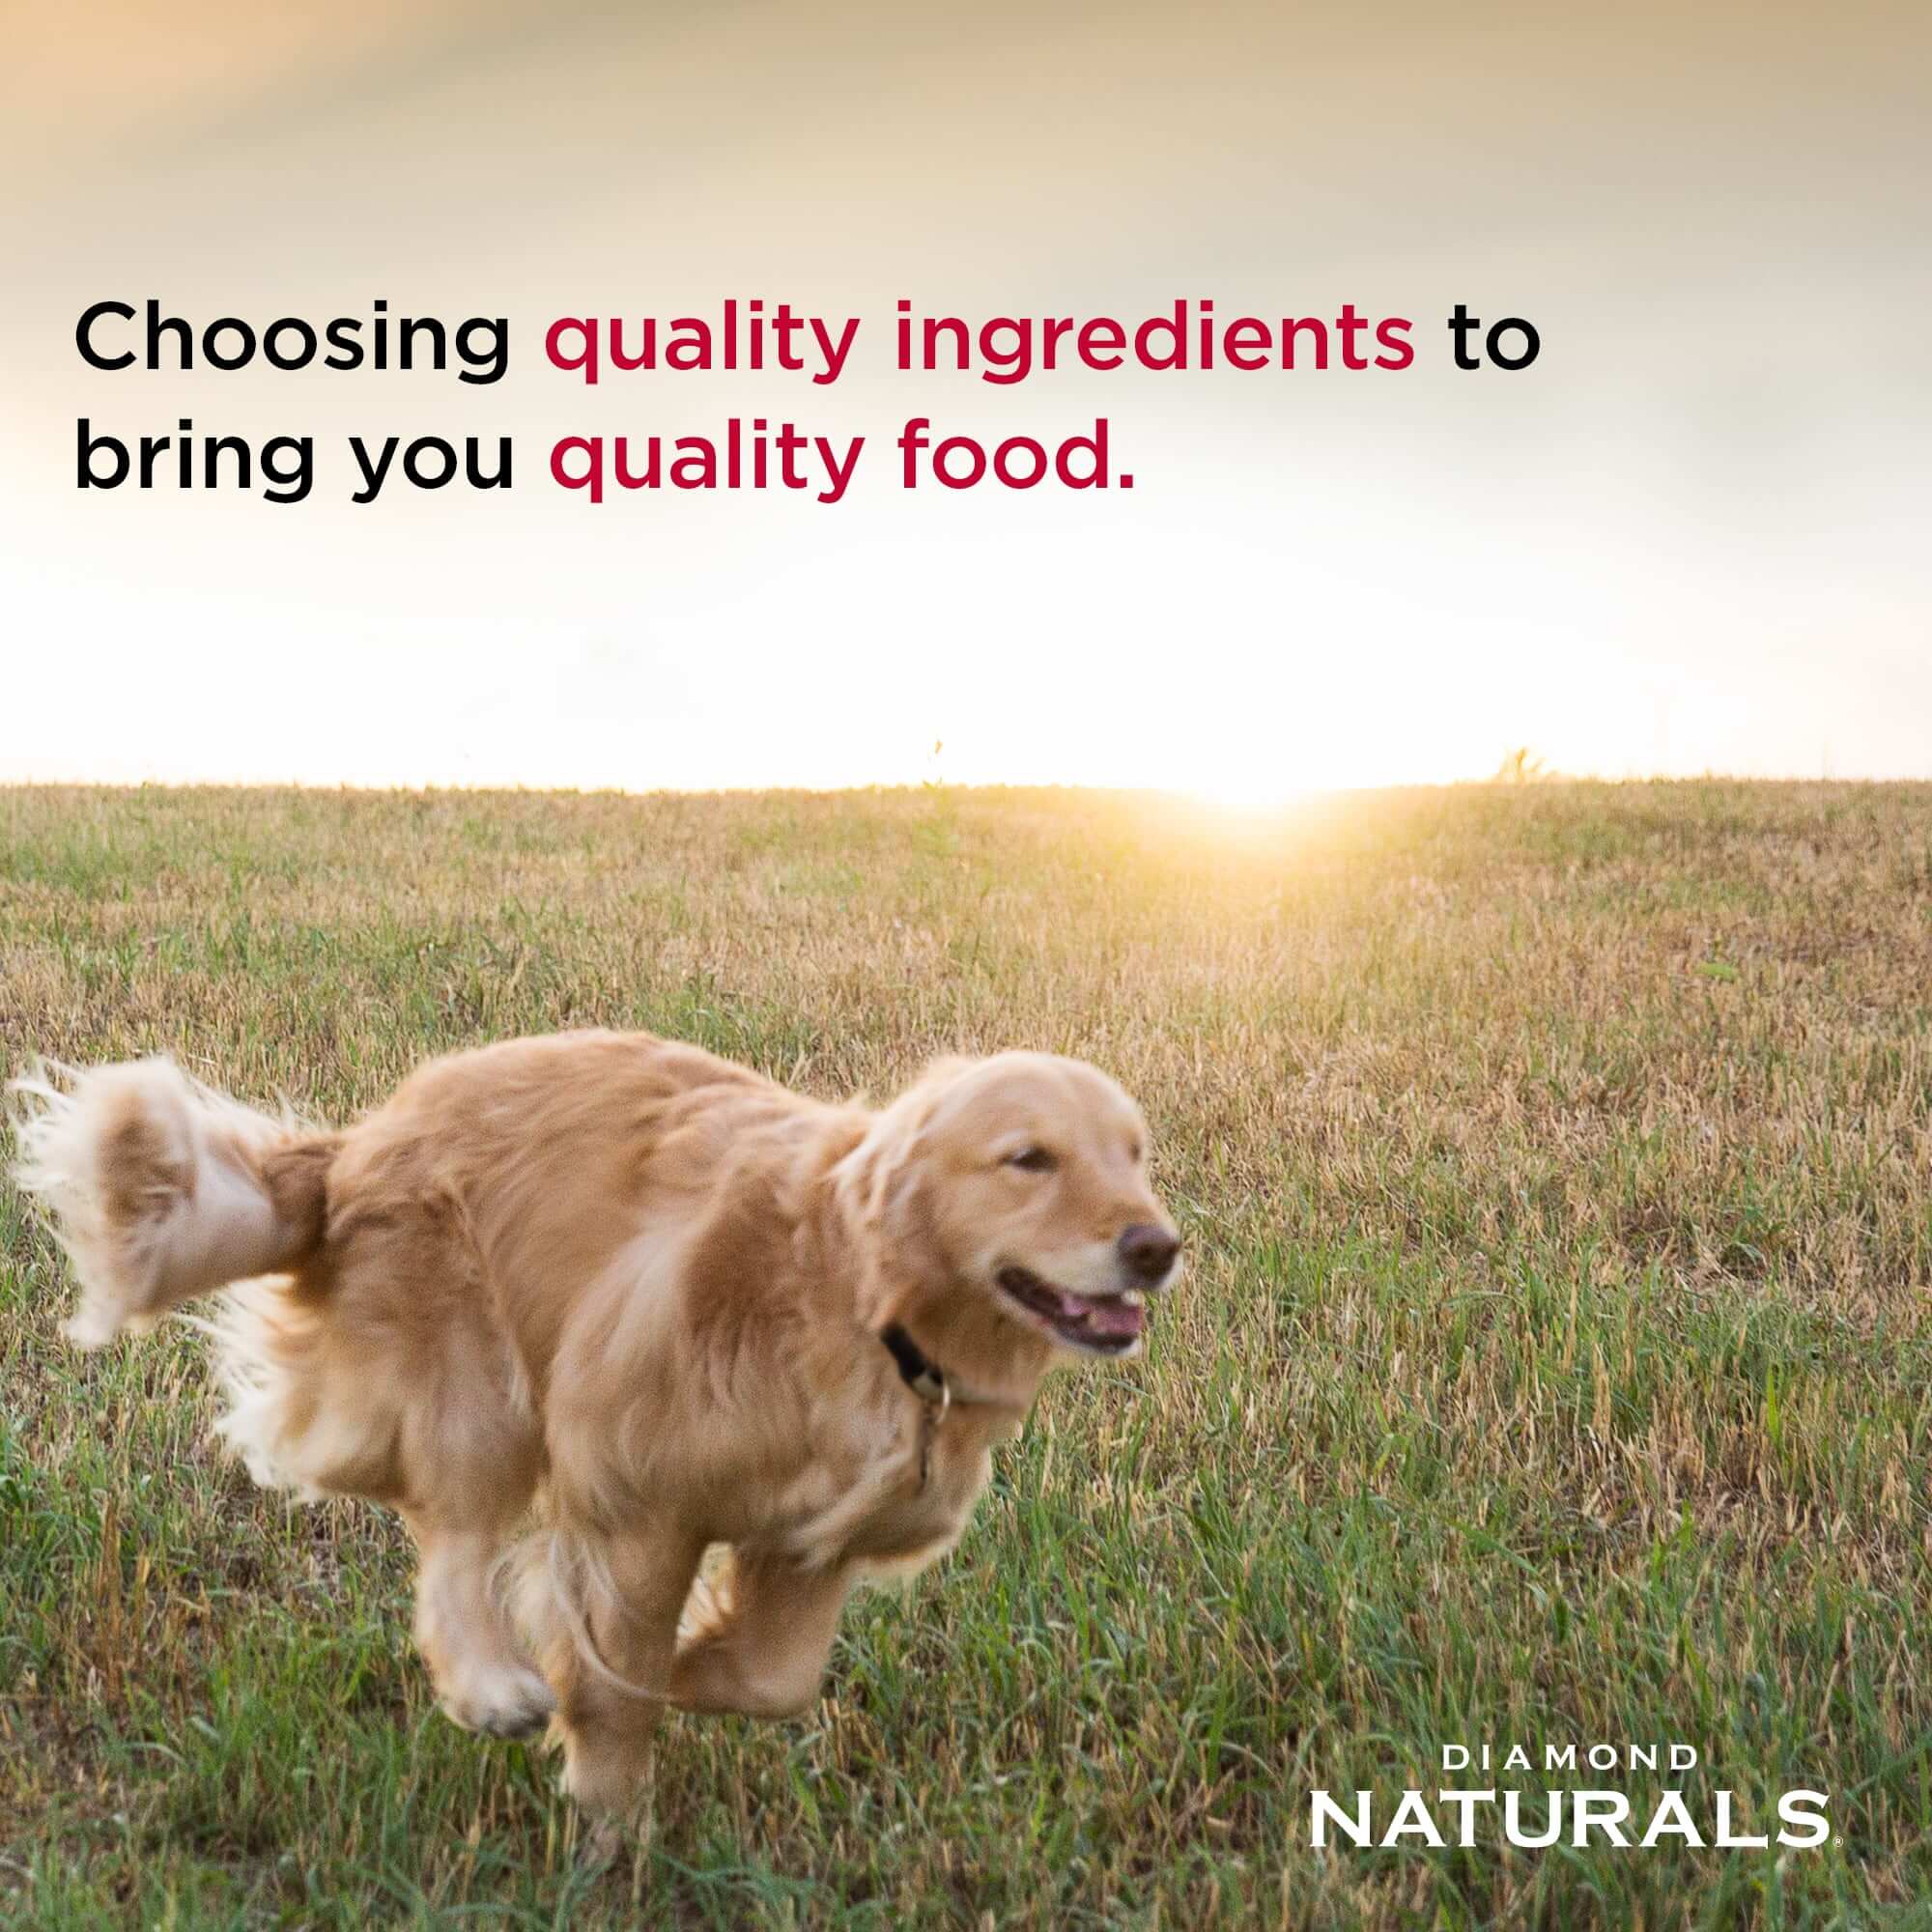 Choose quality ingredients to bring you quality food